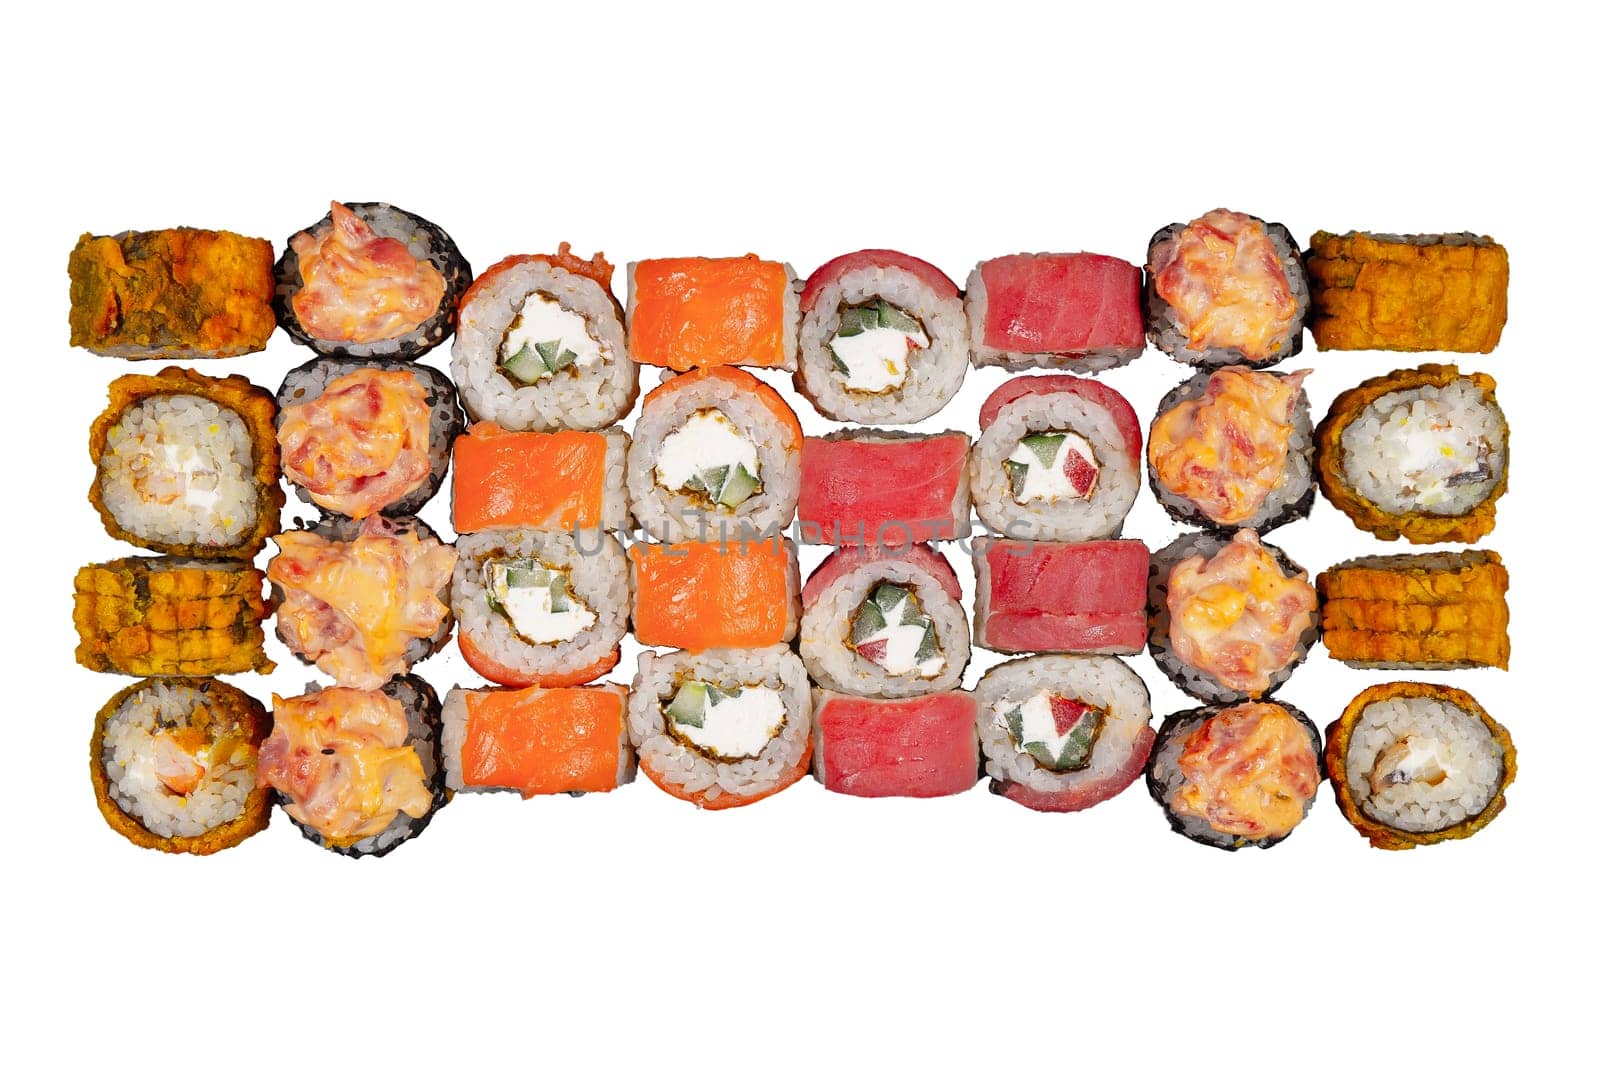 Sushi set served on white background. by BY-_-BY